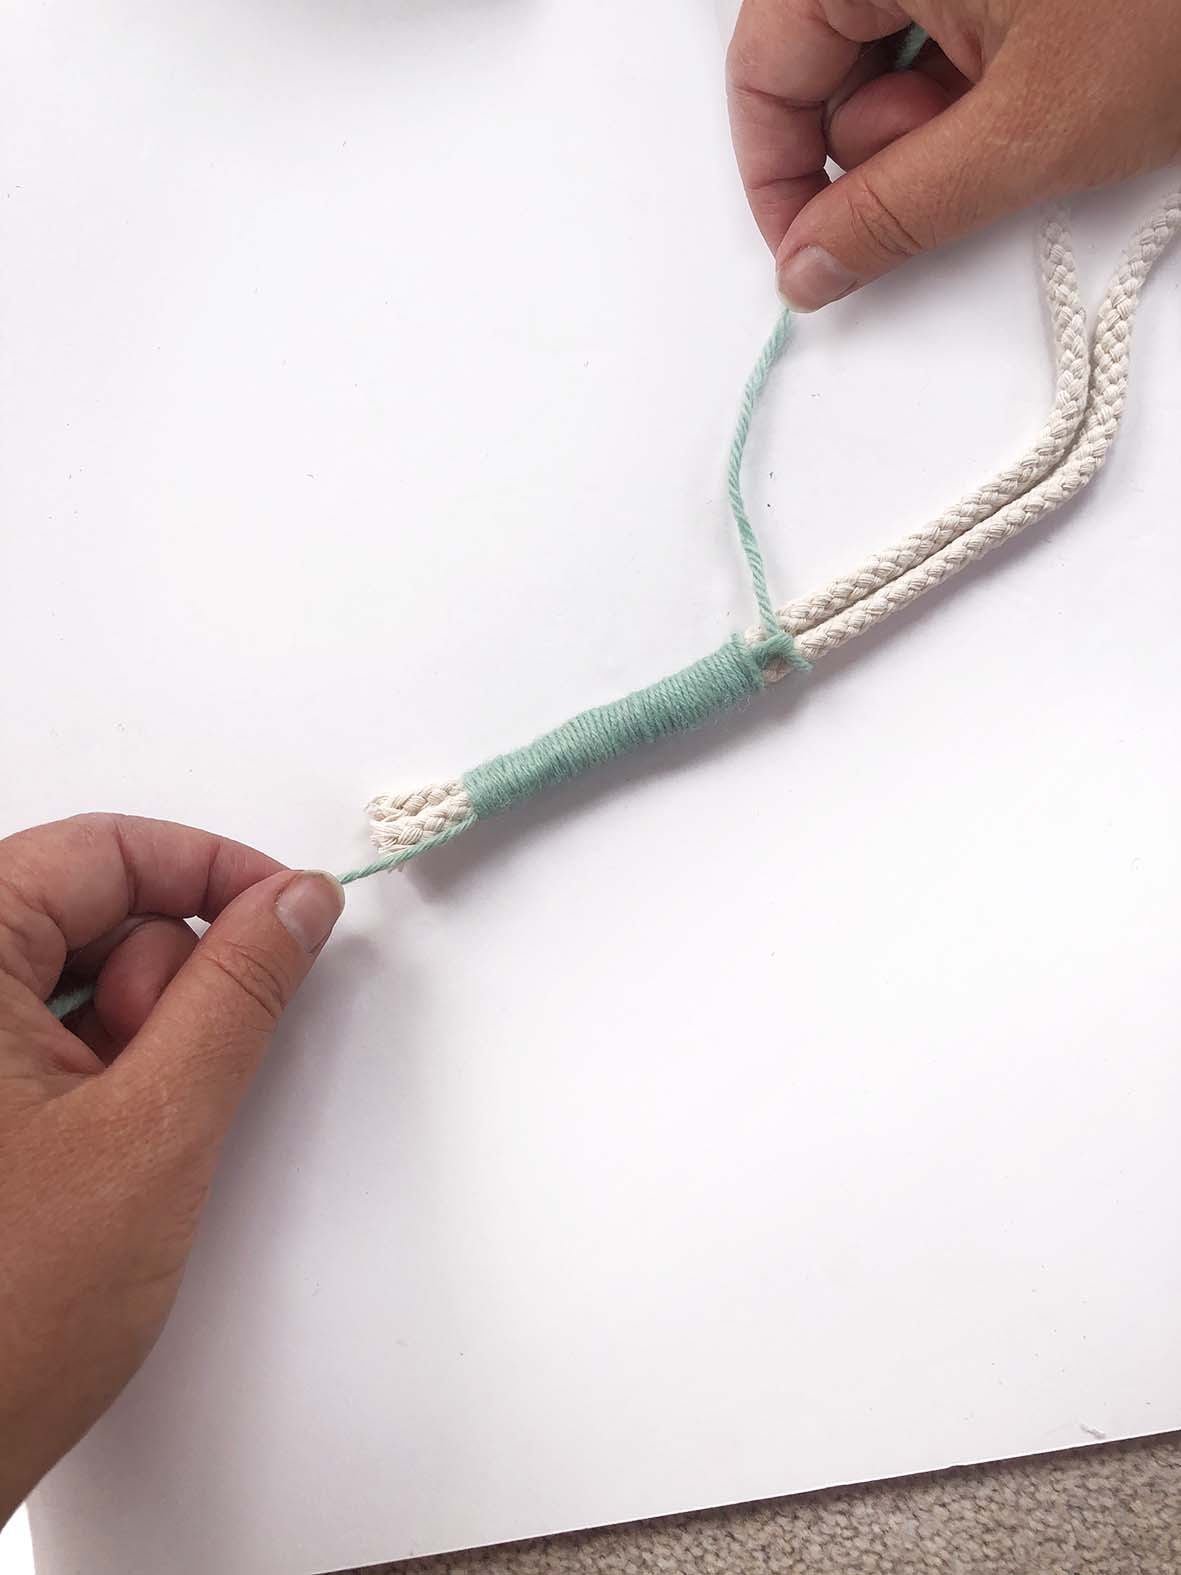 Hands wrapping wool around a cord